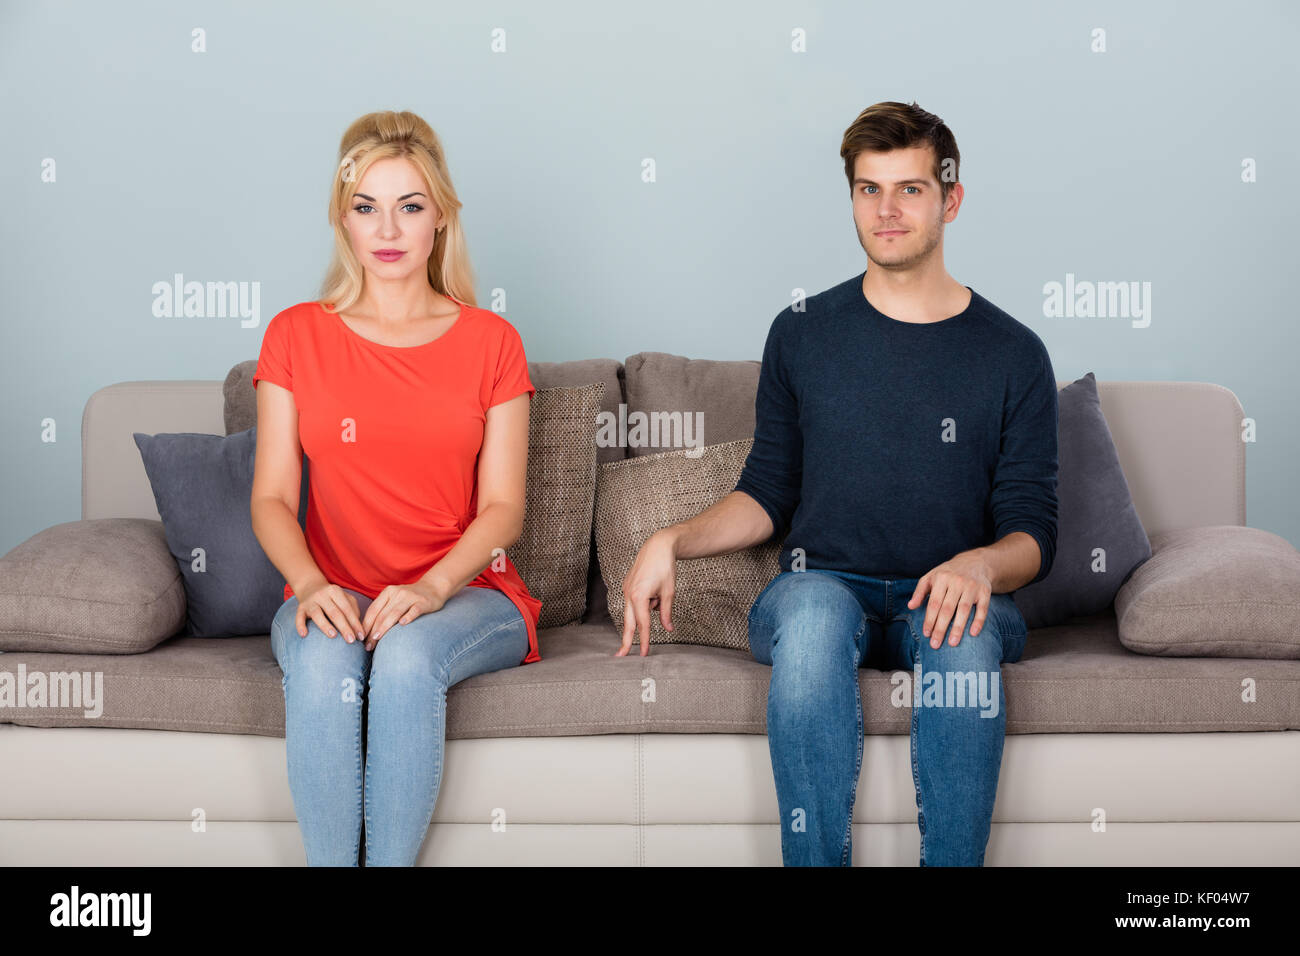 Shy Man Sitting On Couch Flirting With Woman At Home Stock Photo